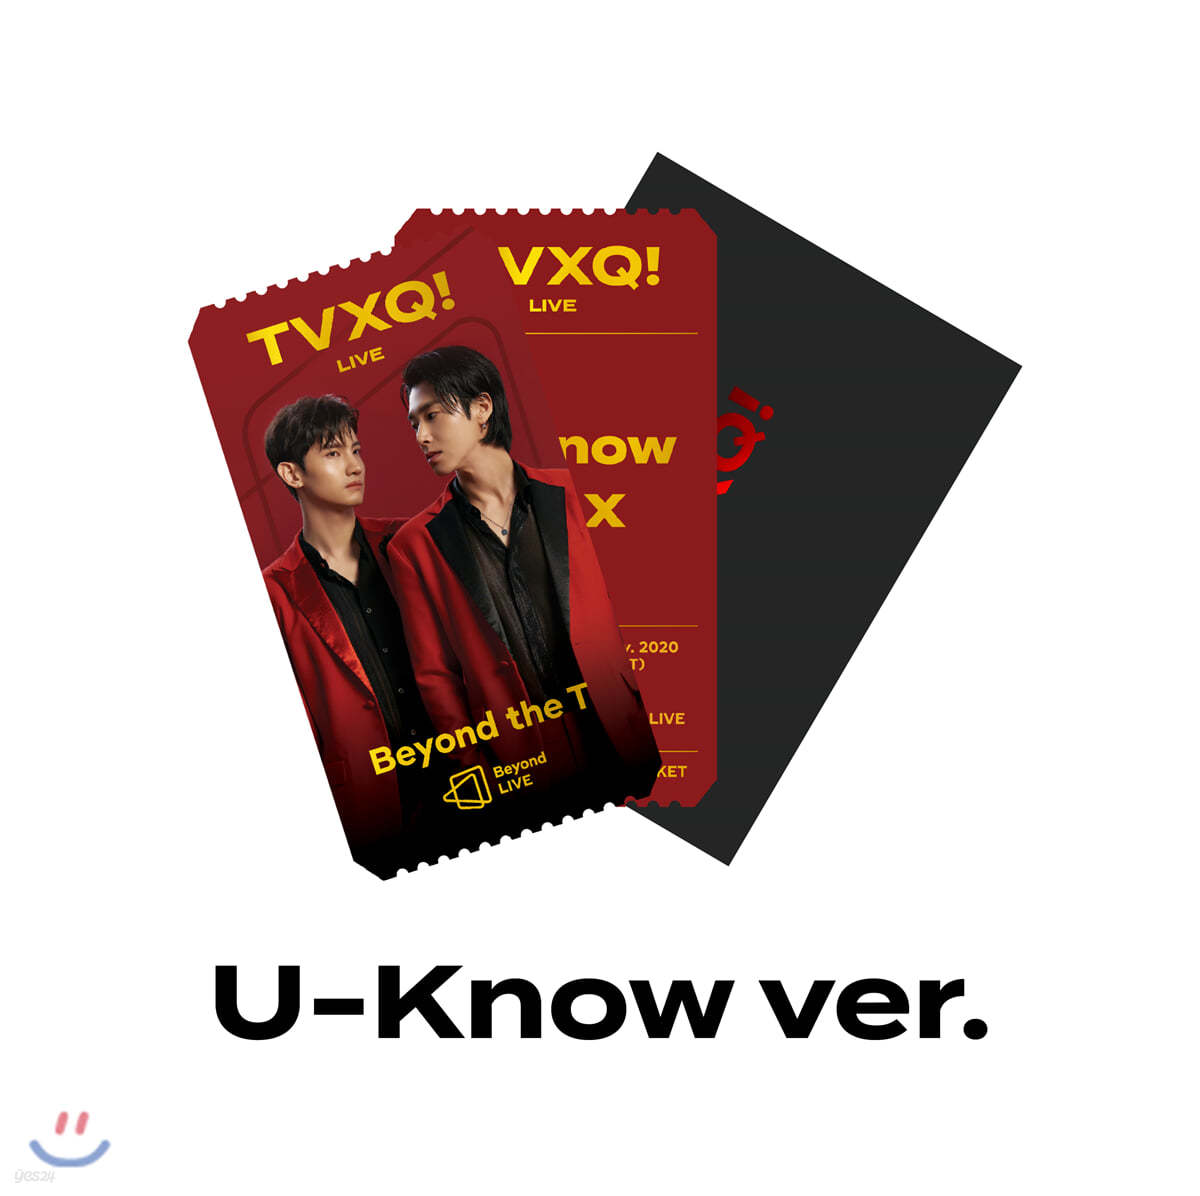 [U-KNOW] TVXQ! Beyond LIVE Beyond the T SPECIAL AR TICKET SET